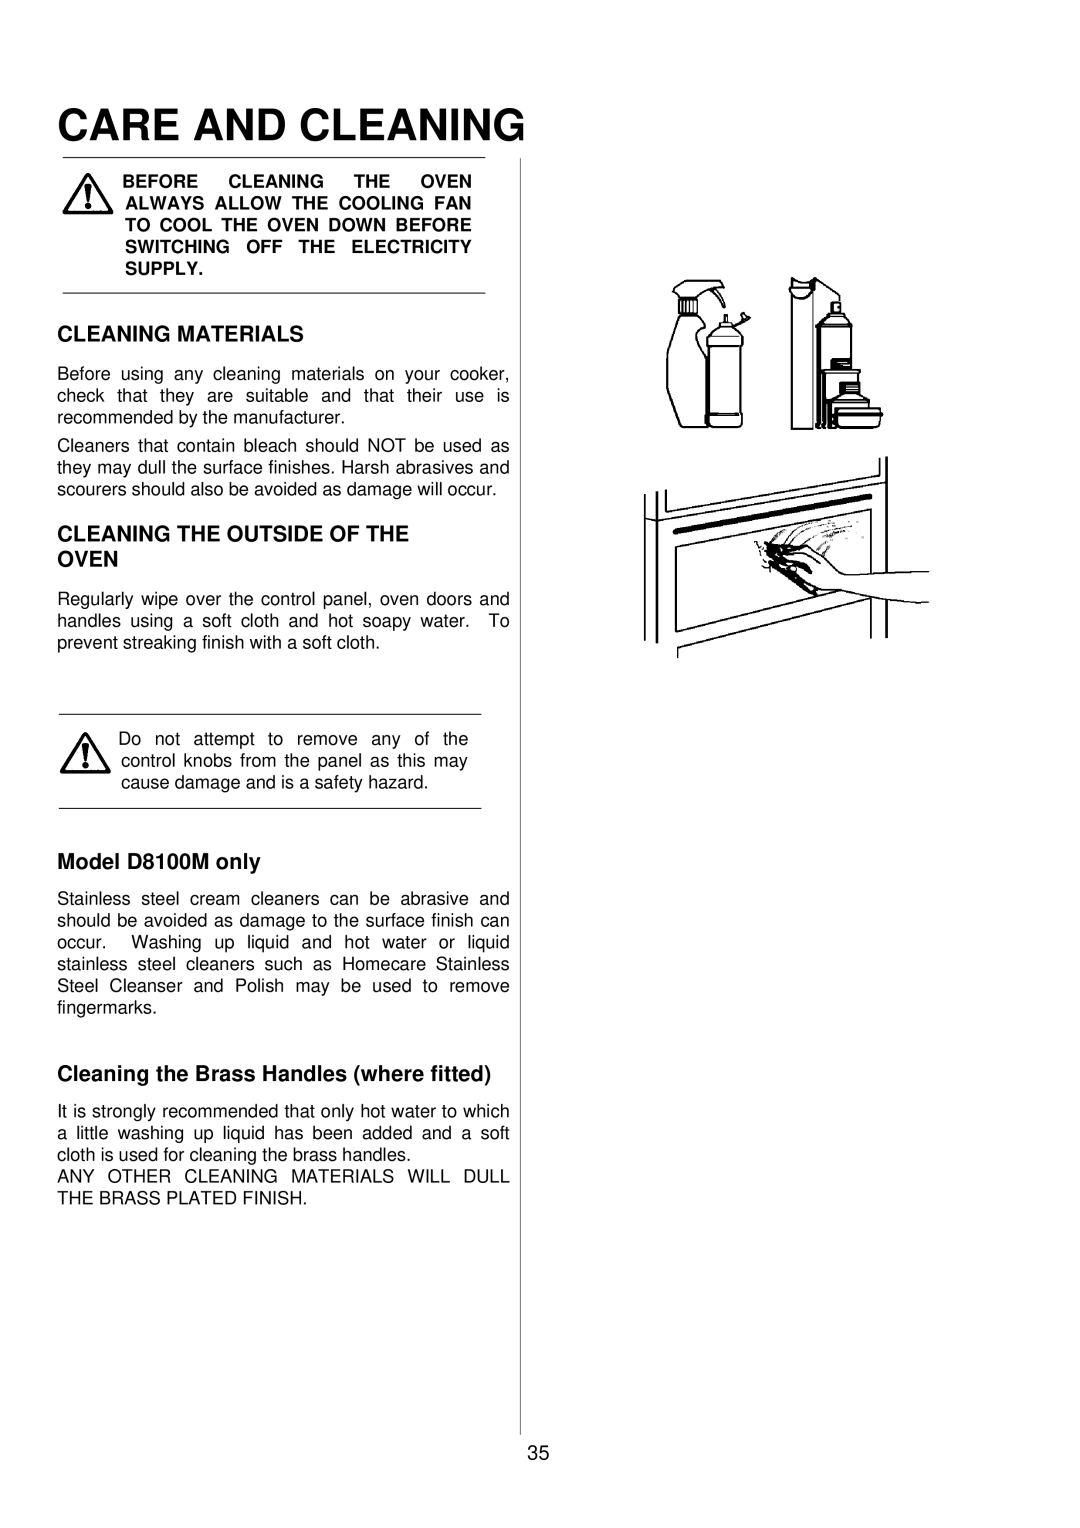 Electrolux D81005, D81000 installation instructions Care and Cleaning, Cleaning Materials, Cleaning the Outside of the Oven 